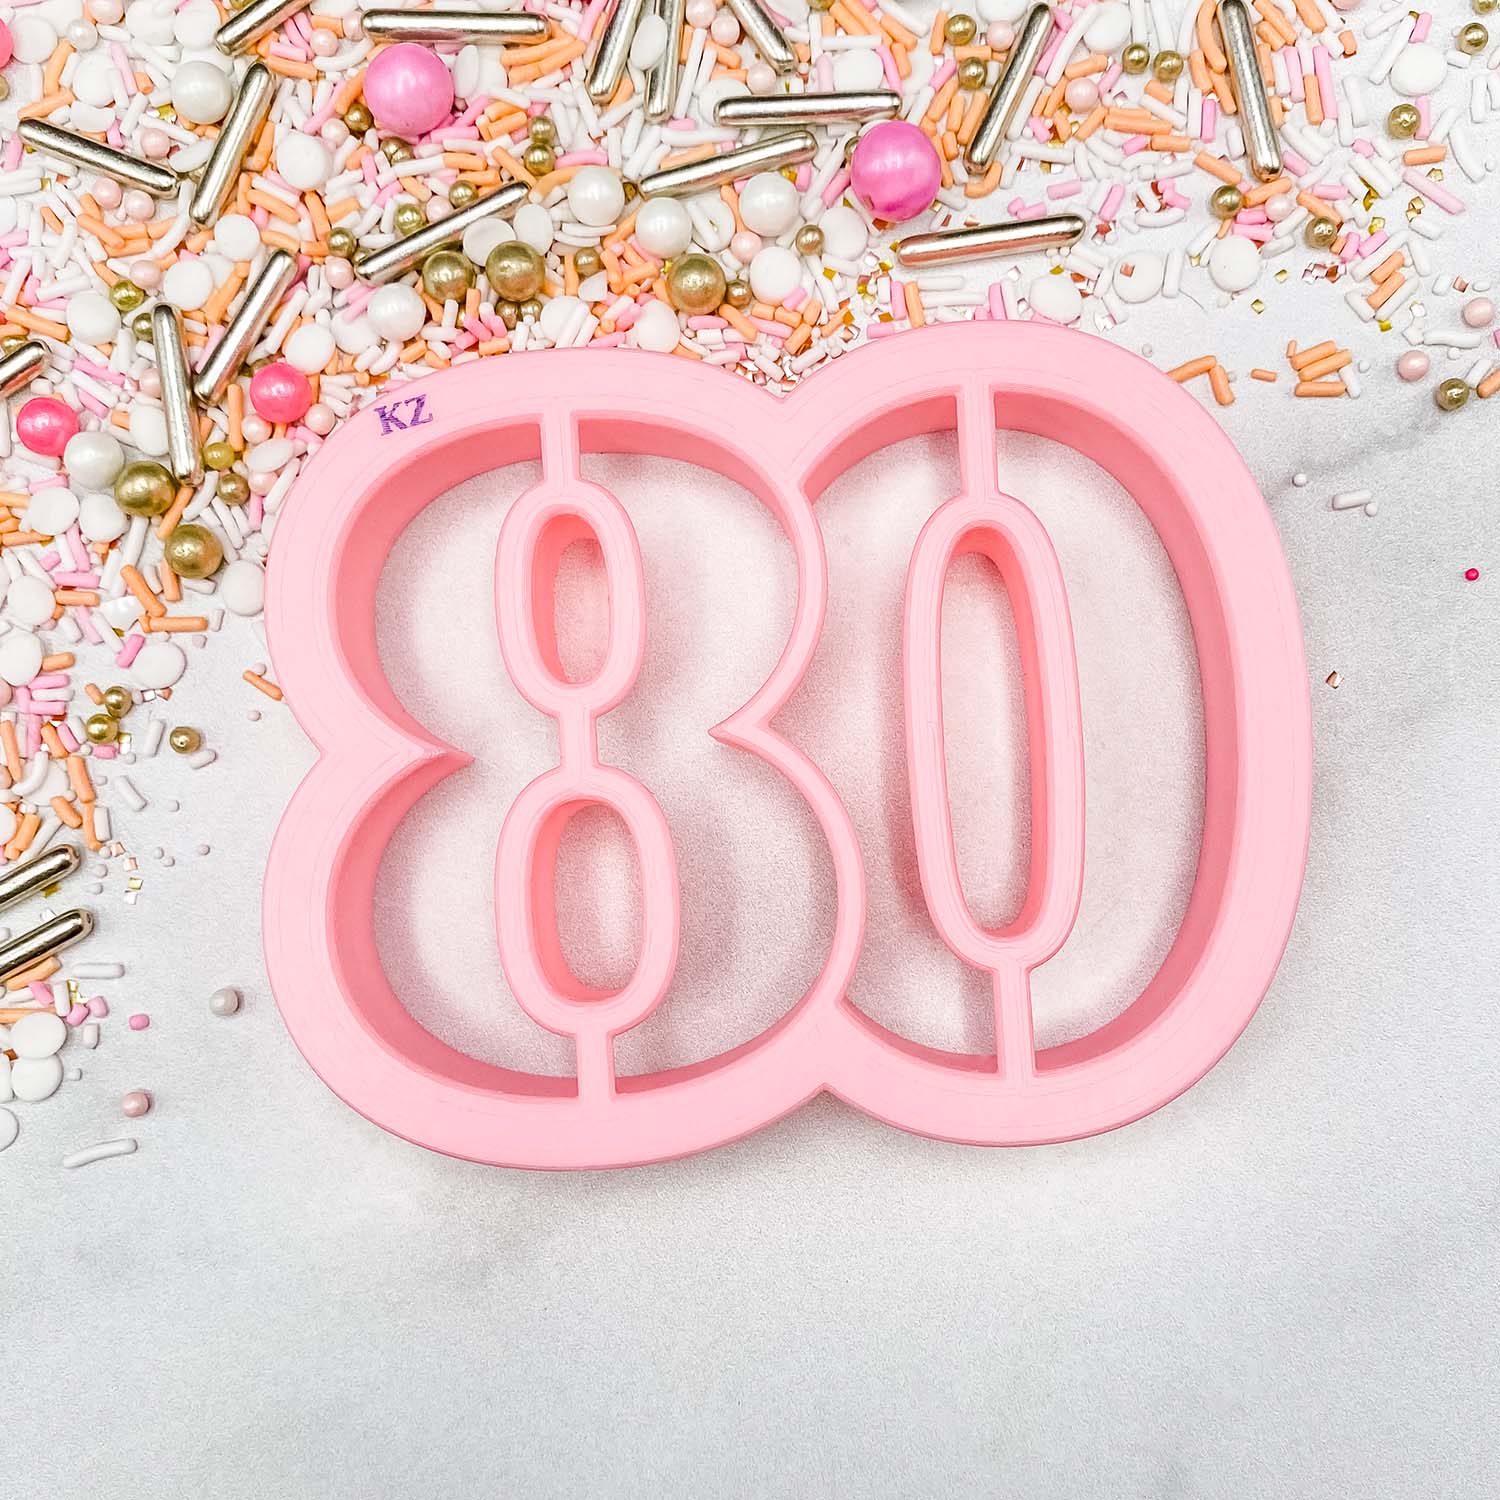 cookie cutter in the shape of the number 80